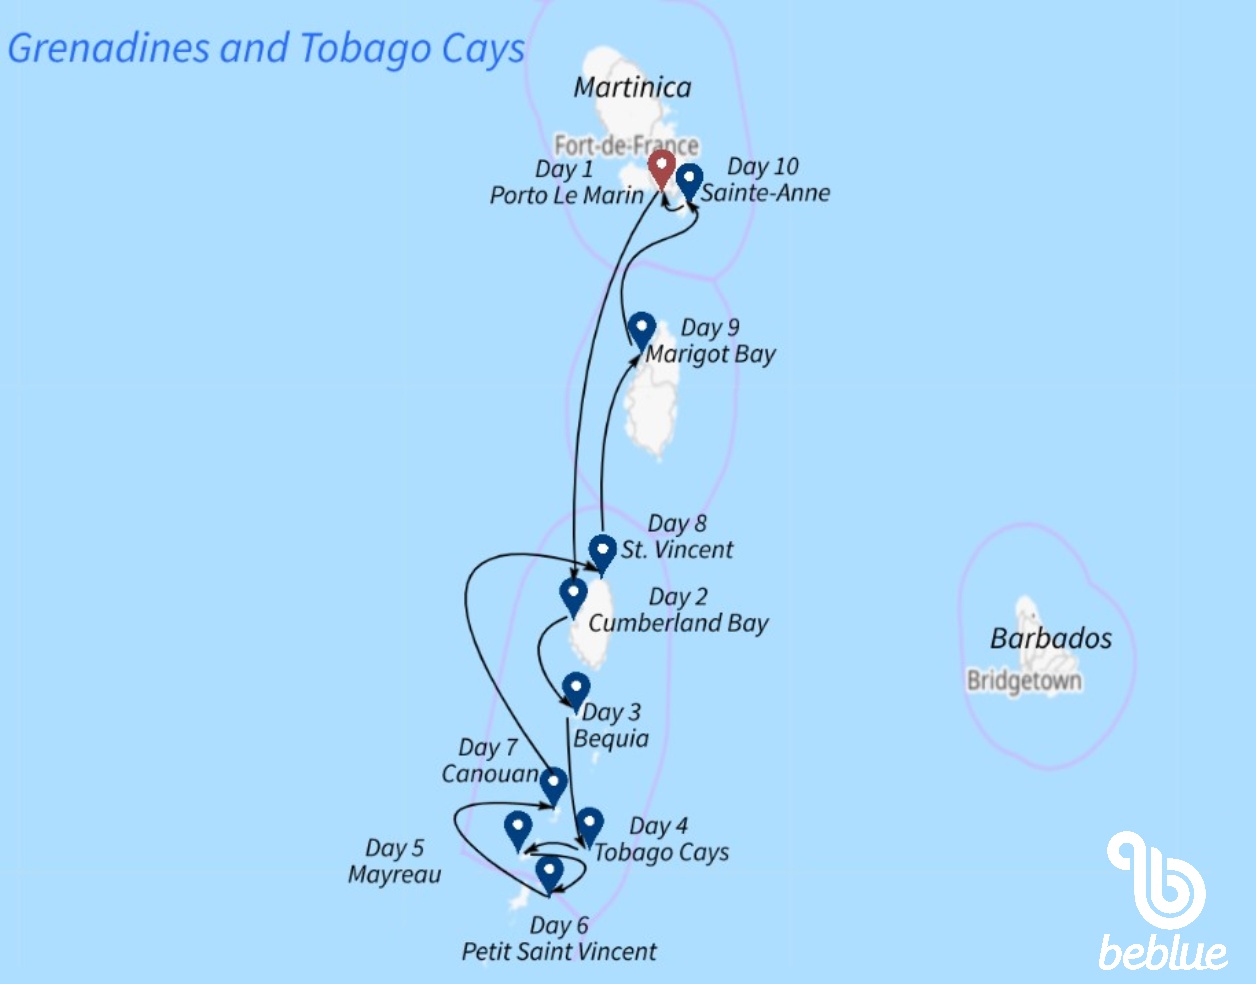 Caribbean, Grenadines and Tobago Cays - ID 62